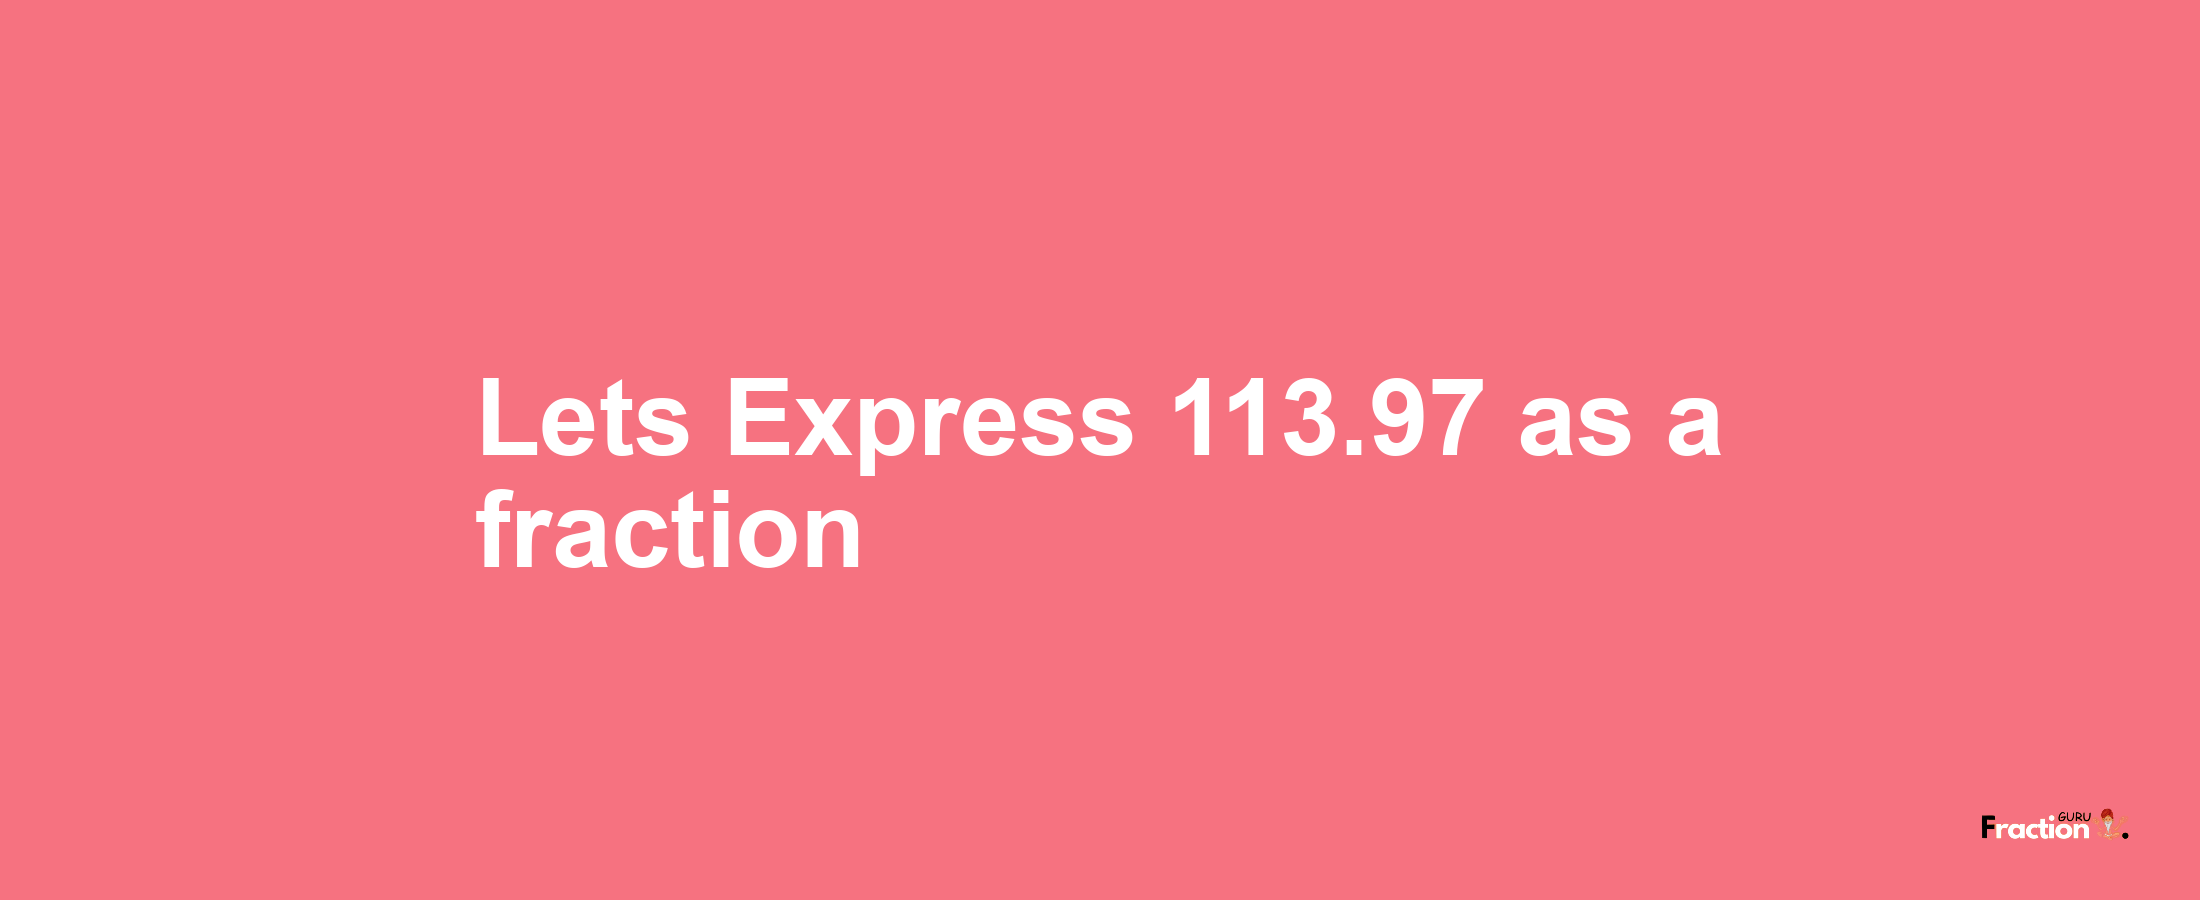 Lets Express 113.97 as afraction